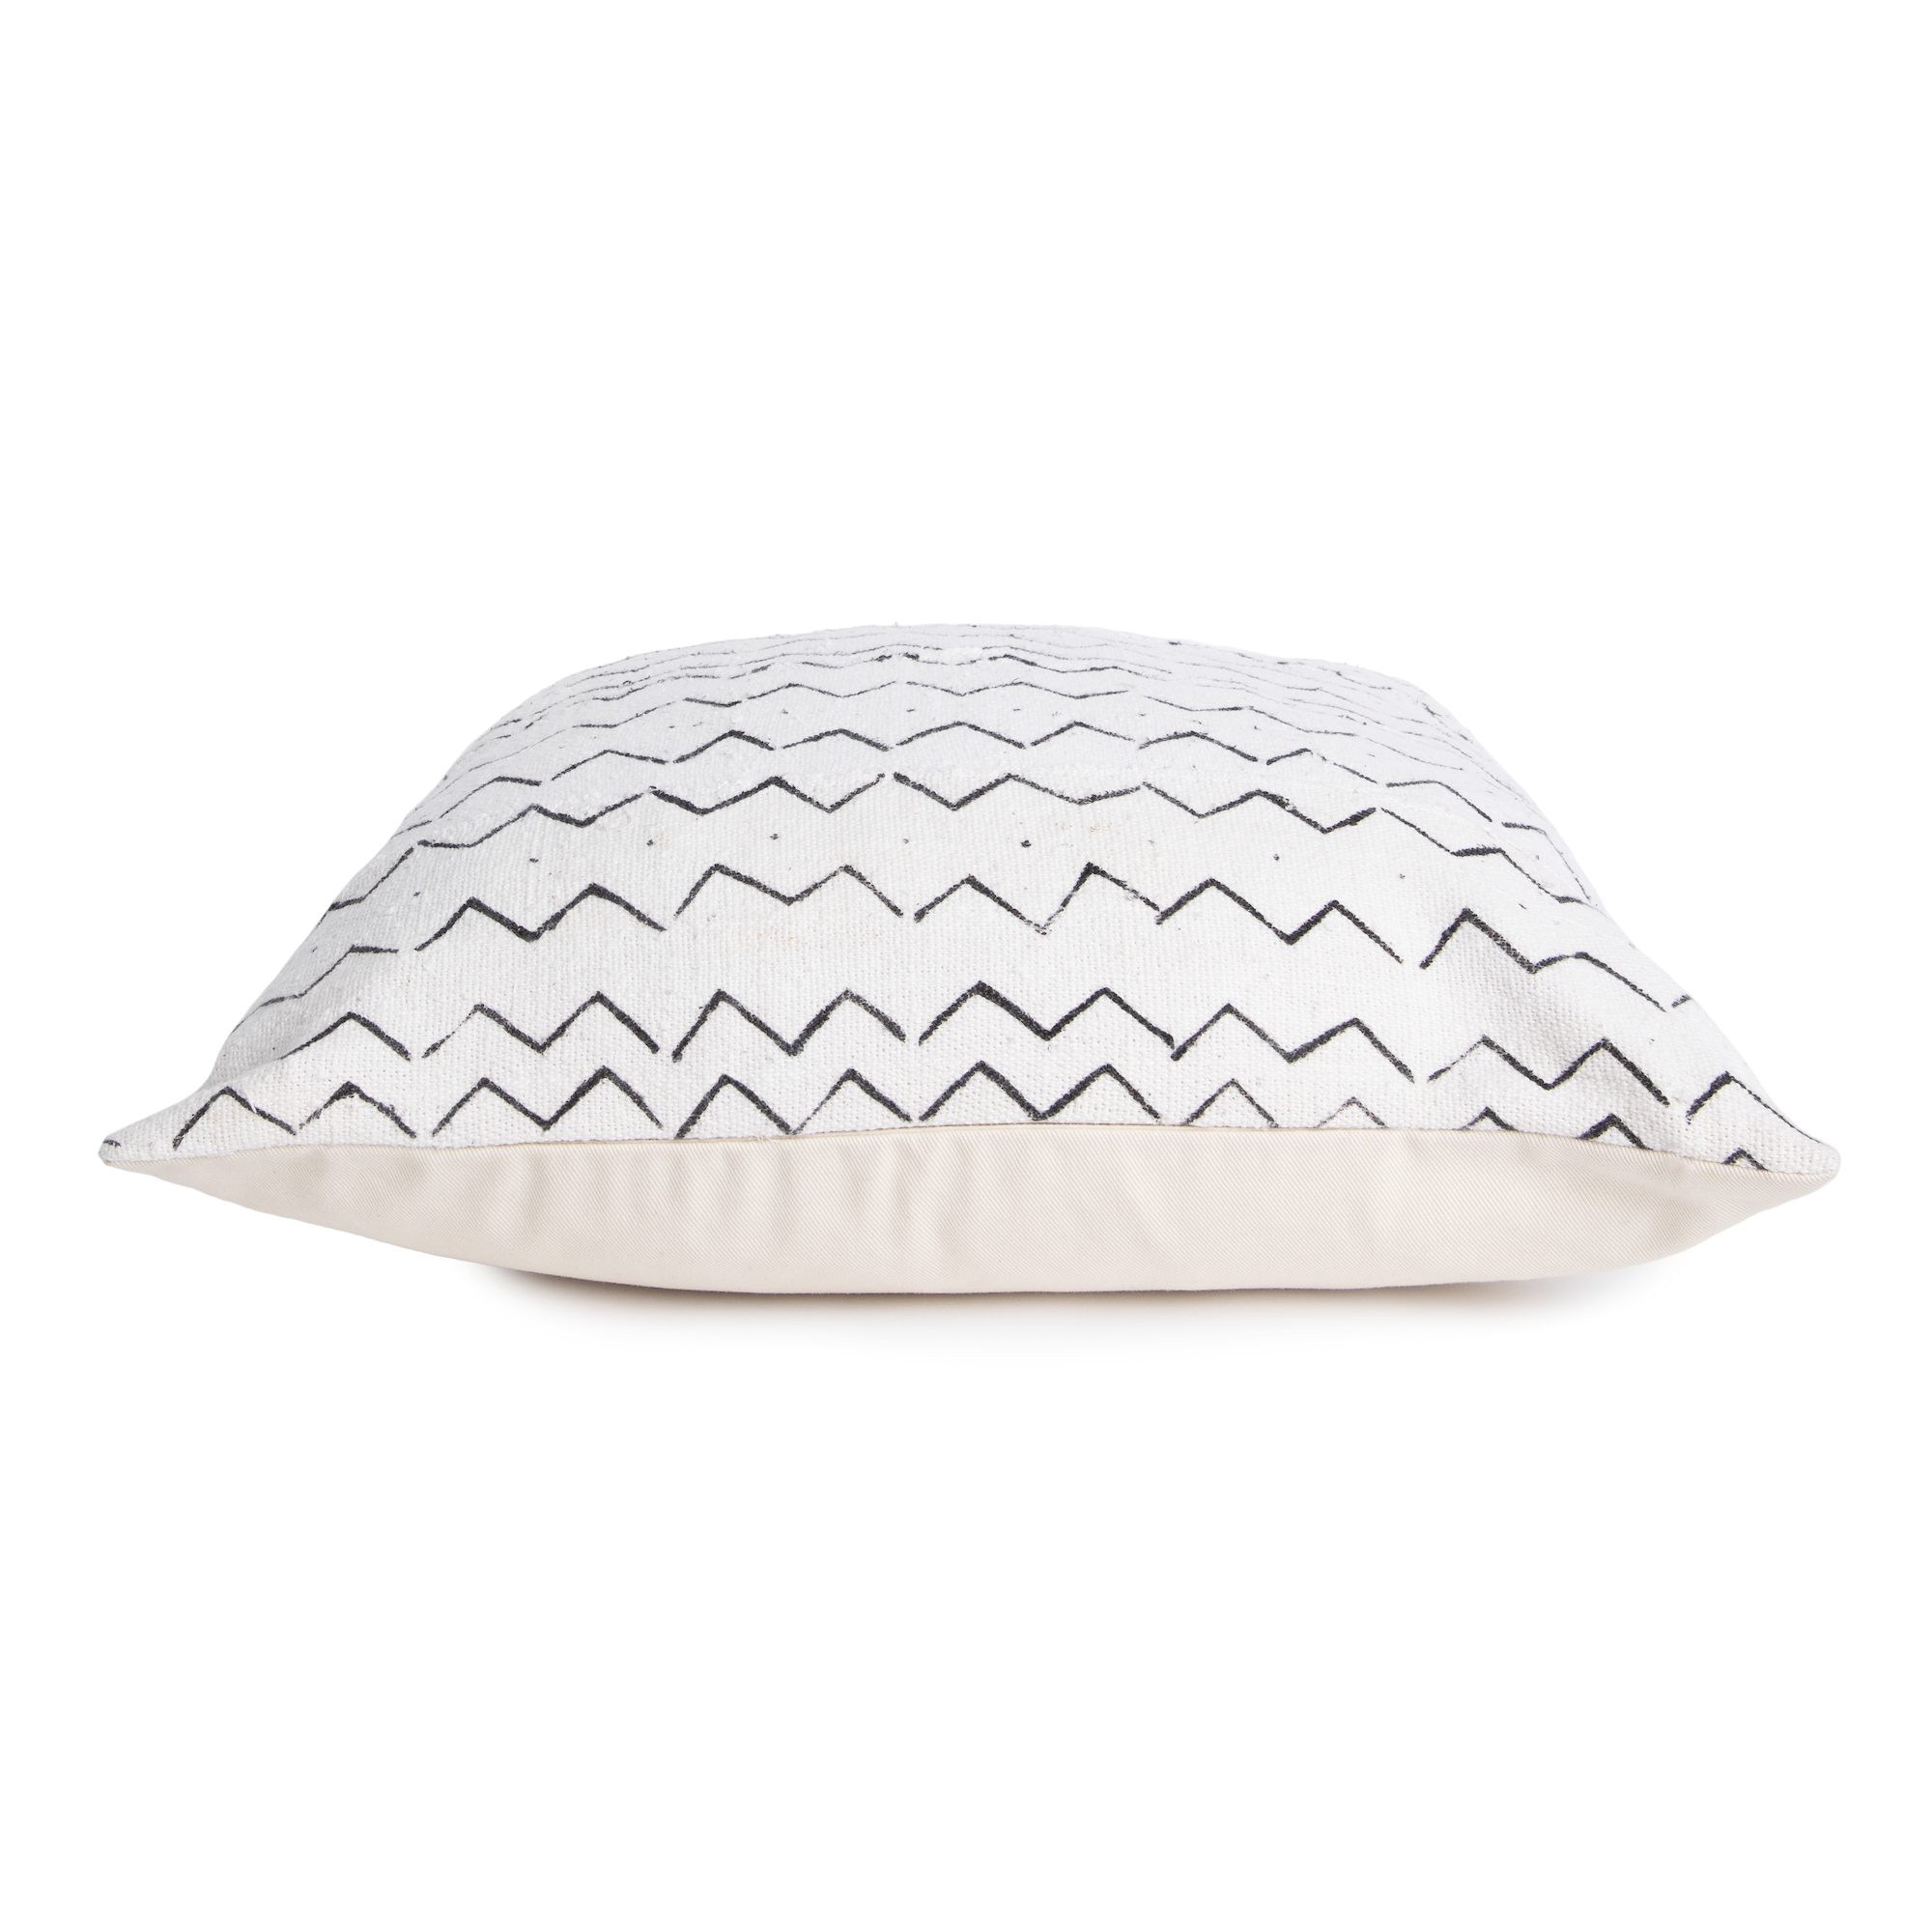 White Mud Cloth Pillow Cover - Tiffany